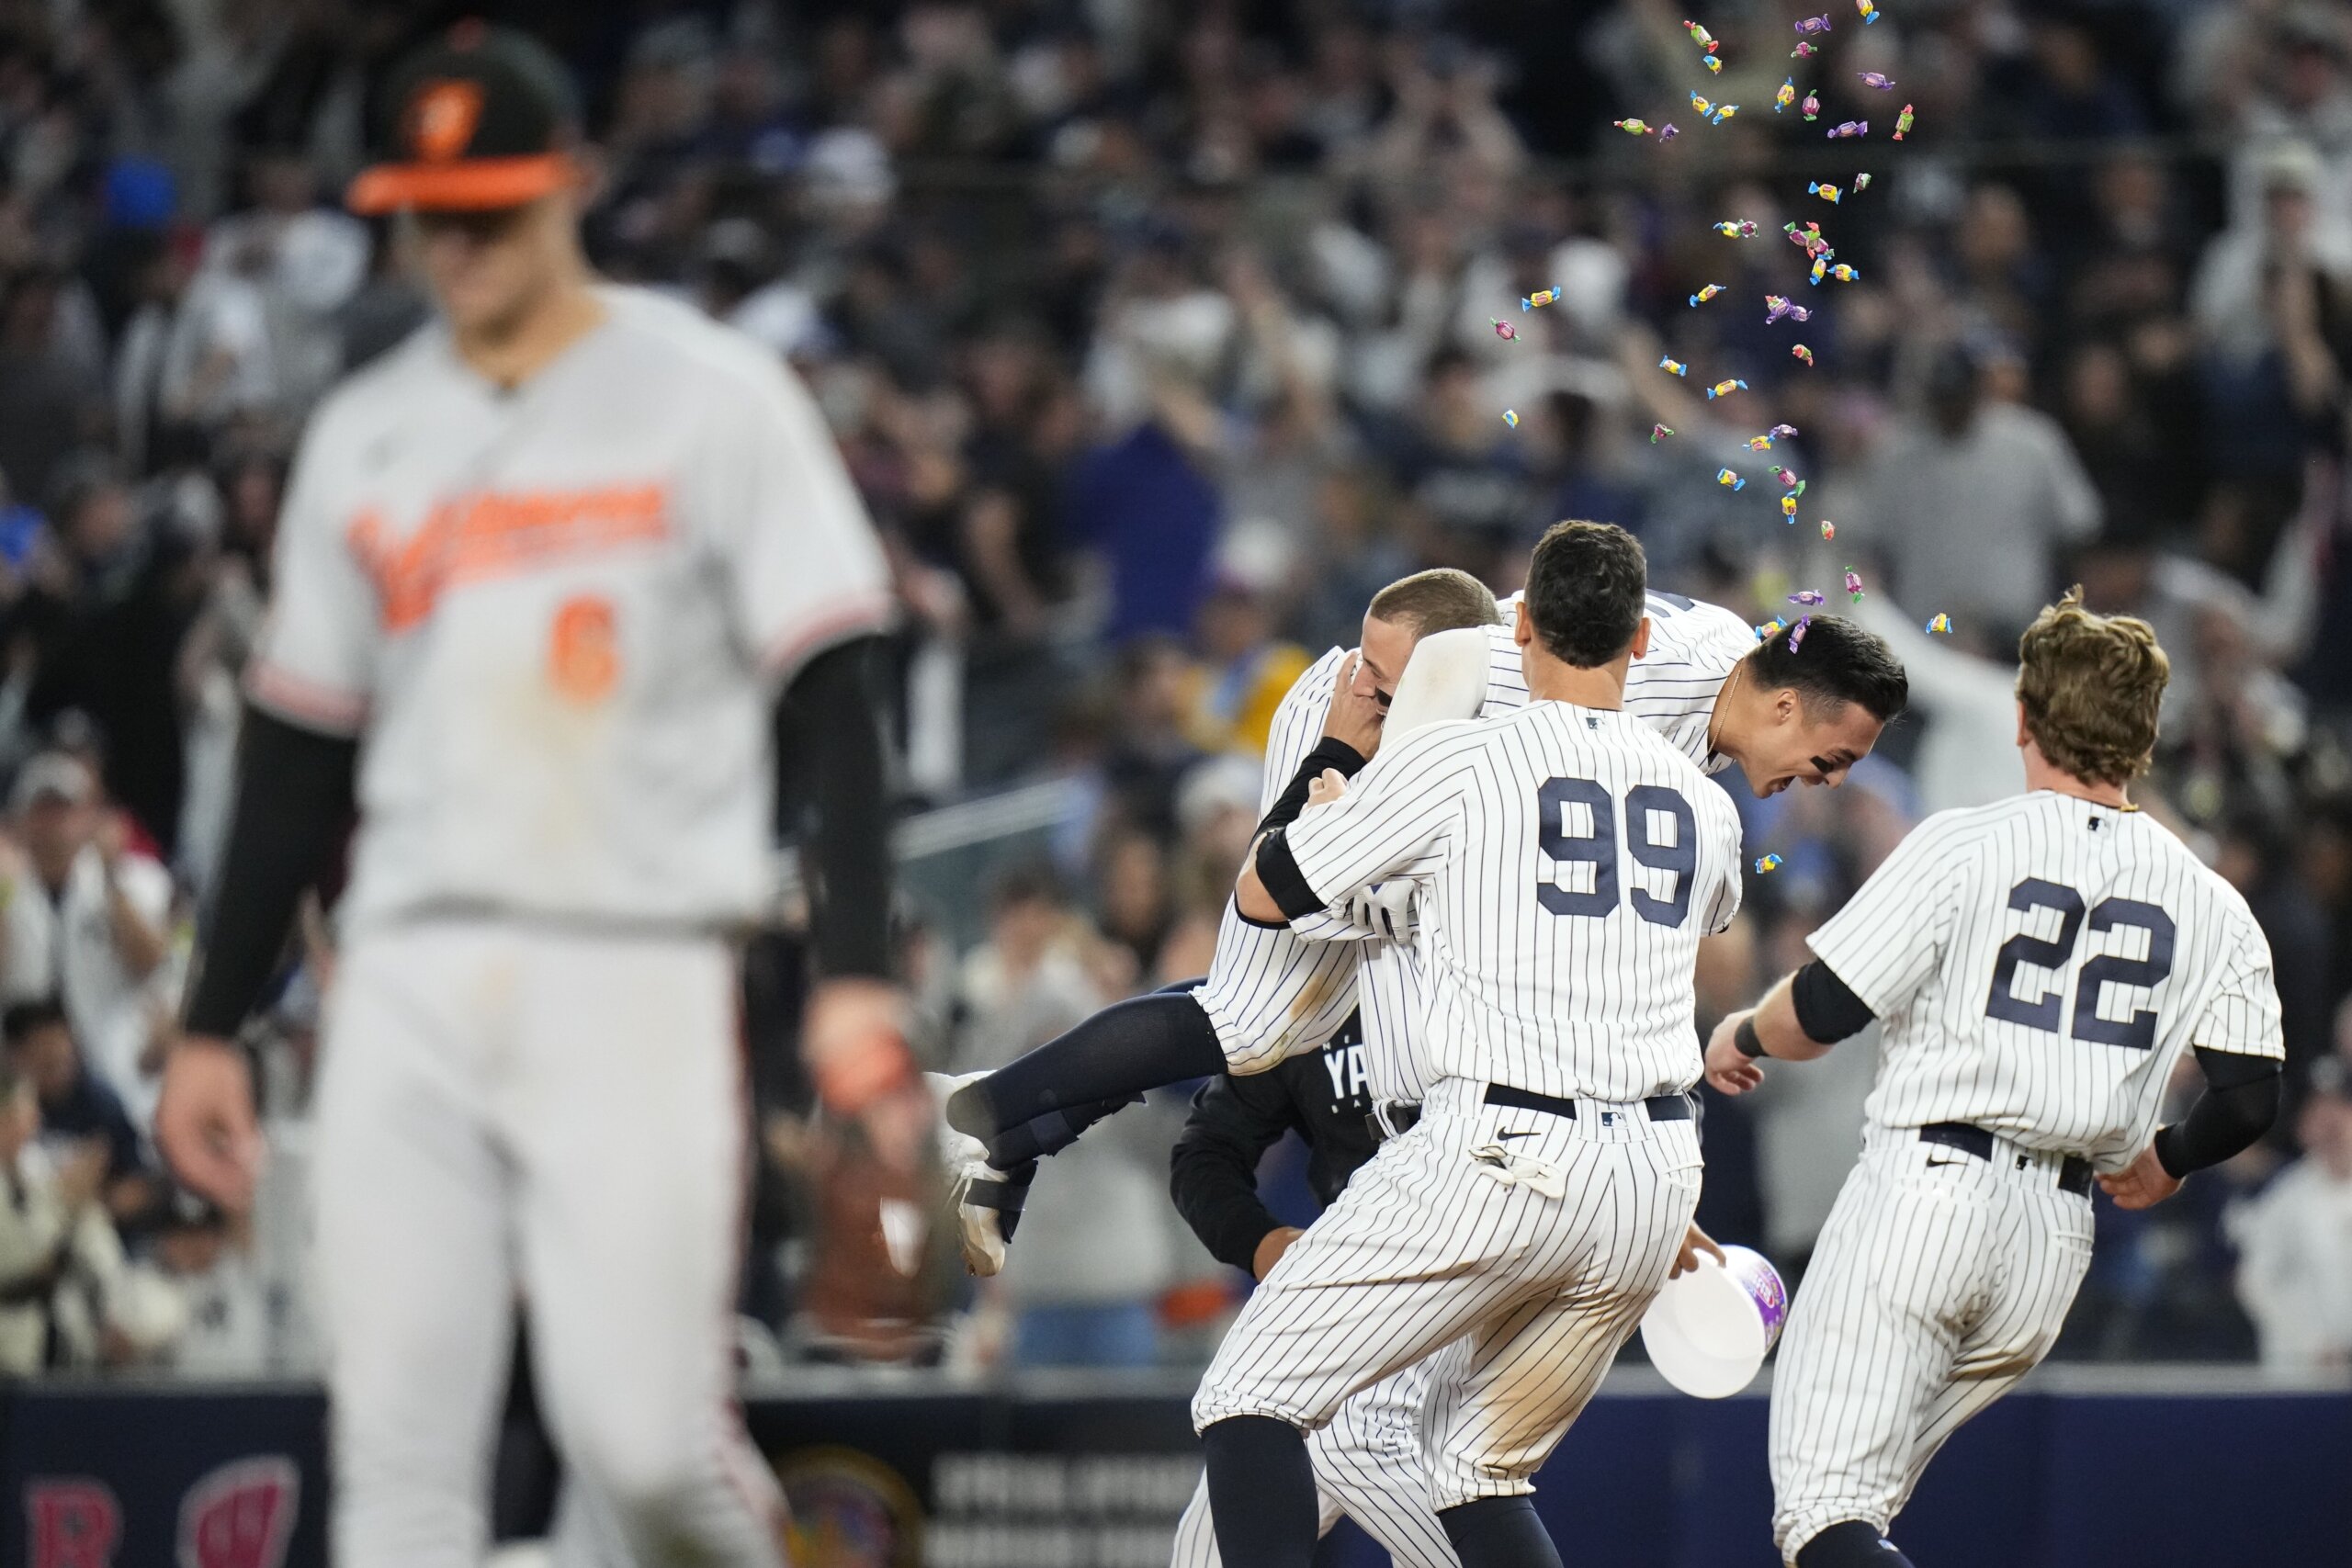 Judge hits tying homer in 9th, Volpe wins it in 10th as Yankees rally past  Orioles 6-5 in Bronx